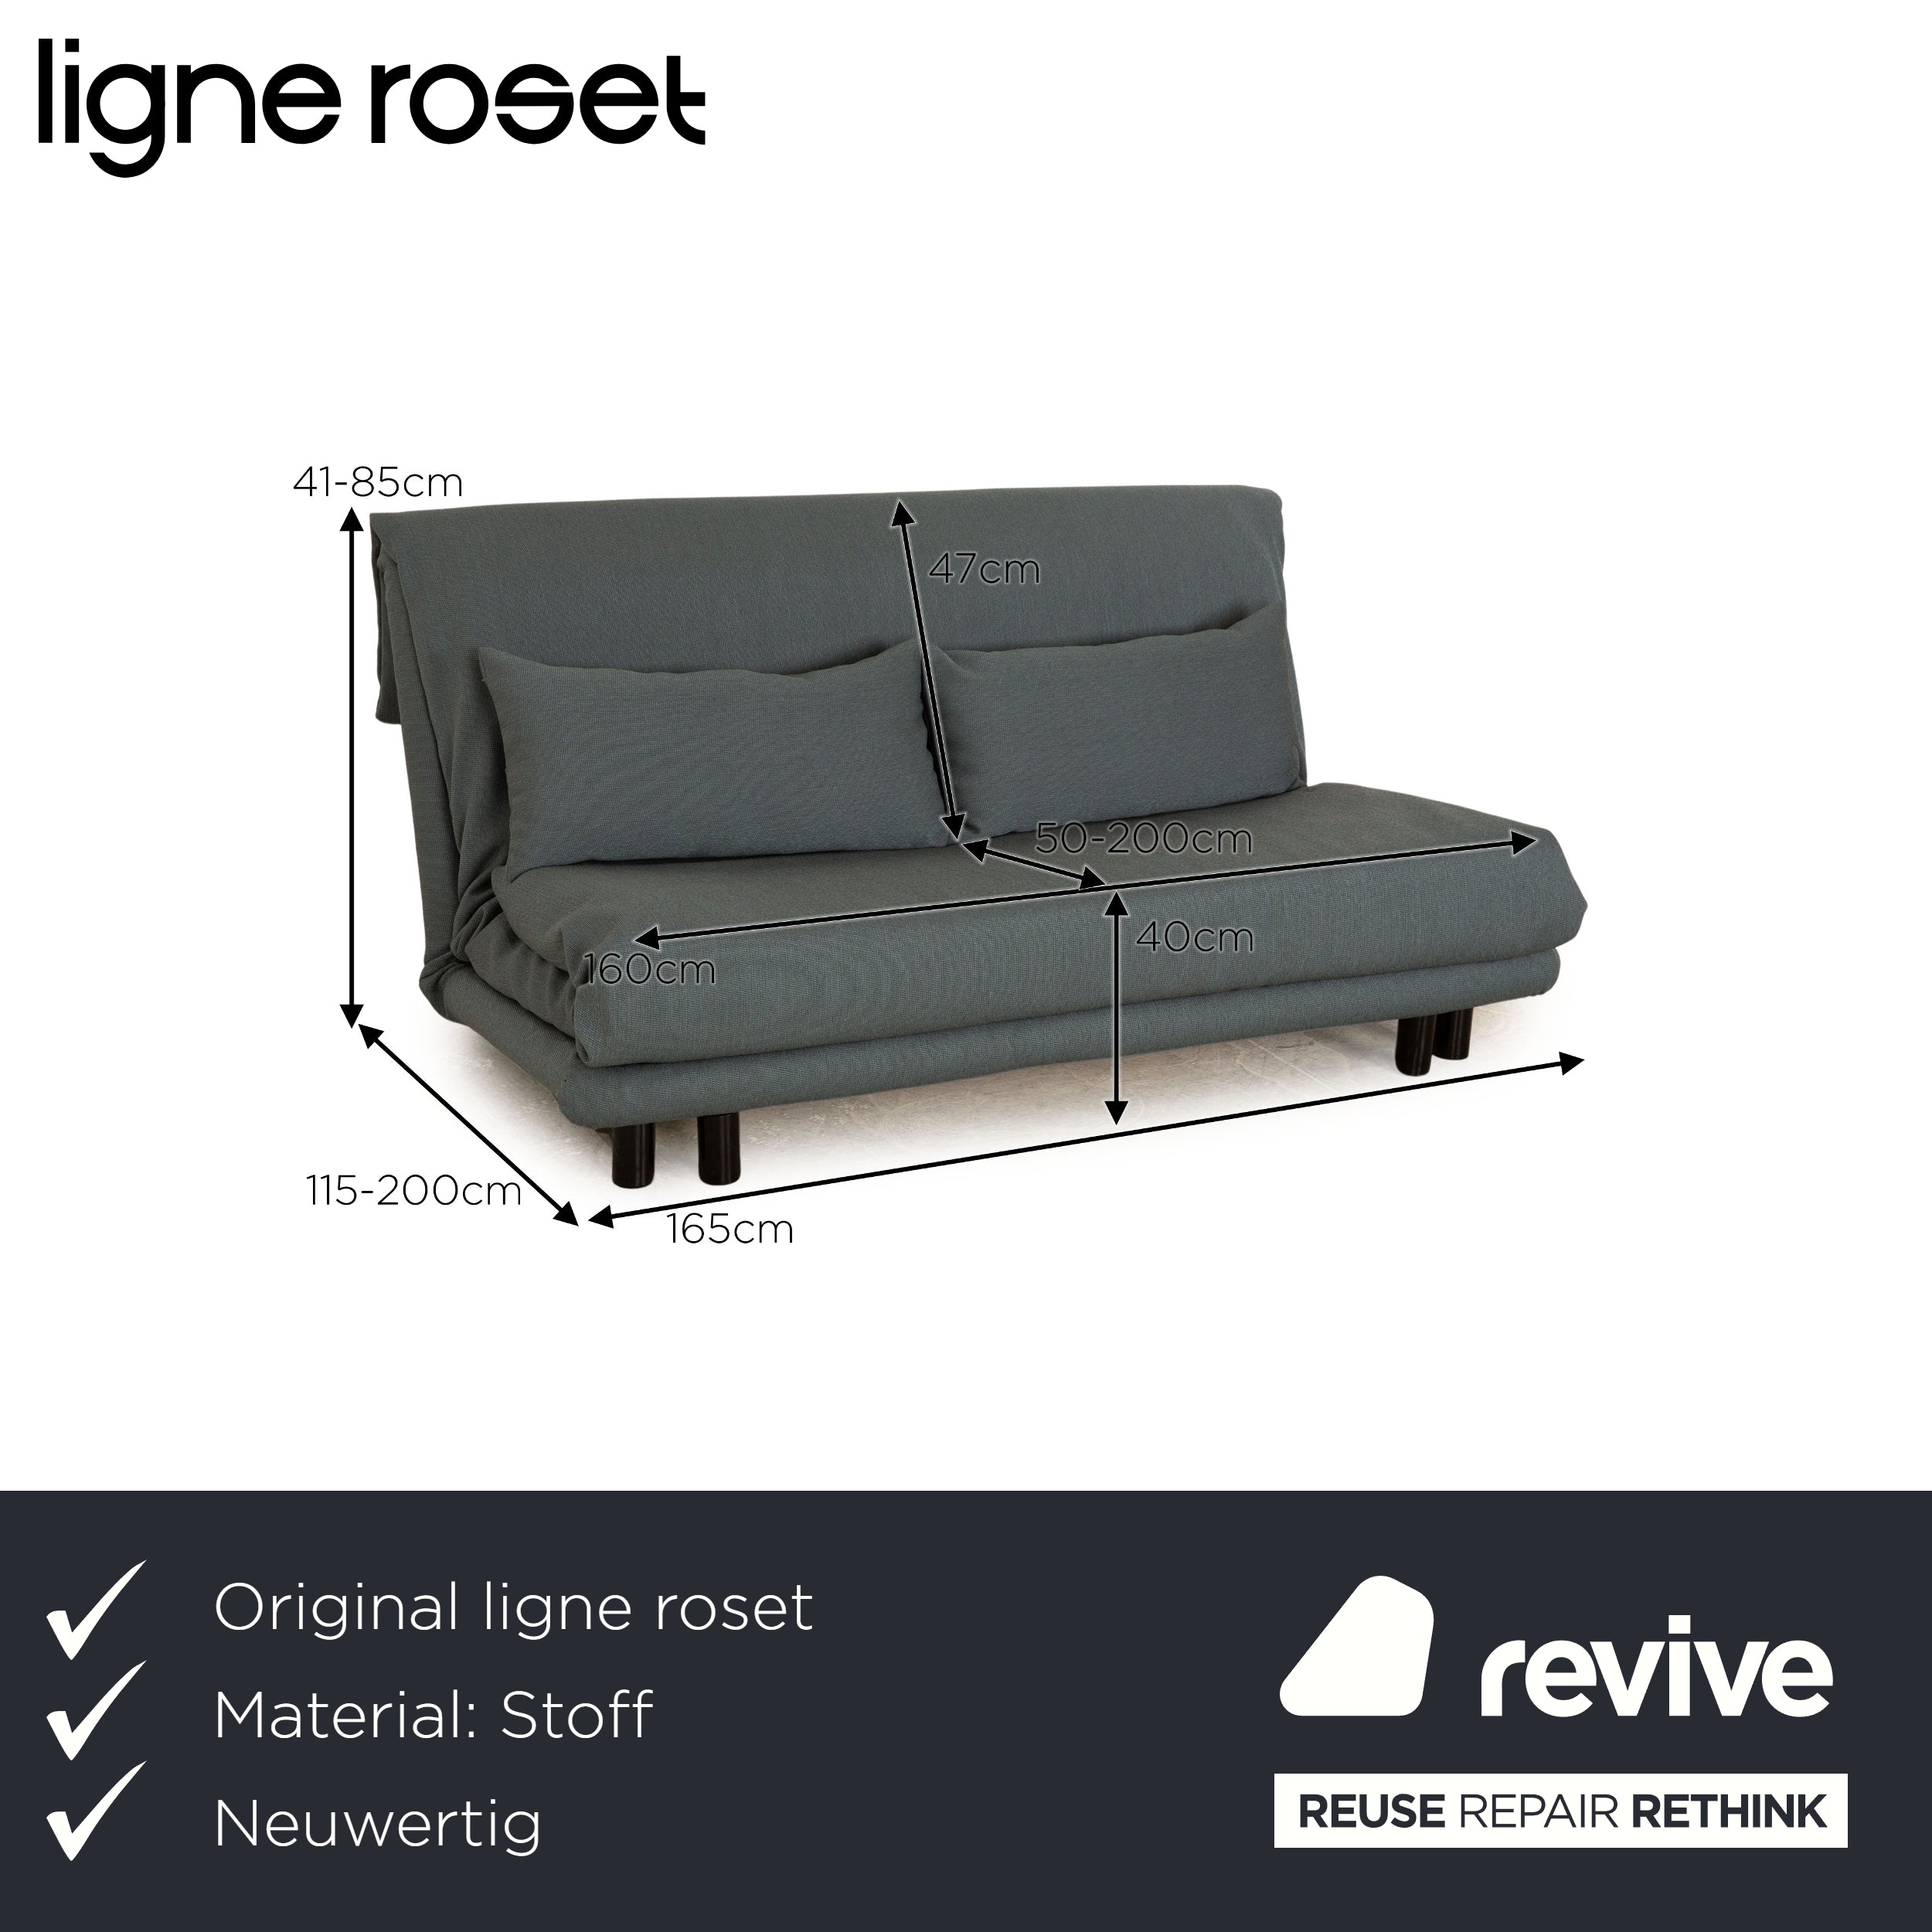 ligne roset Multy fabric three-seater gray blue manual function sofa couch sofa bed new cover